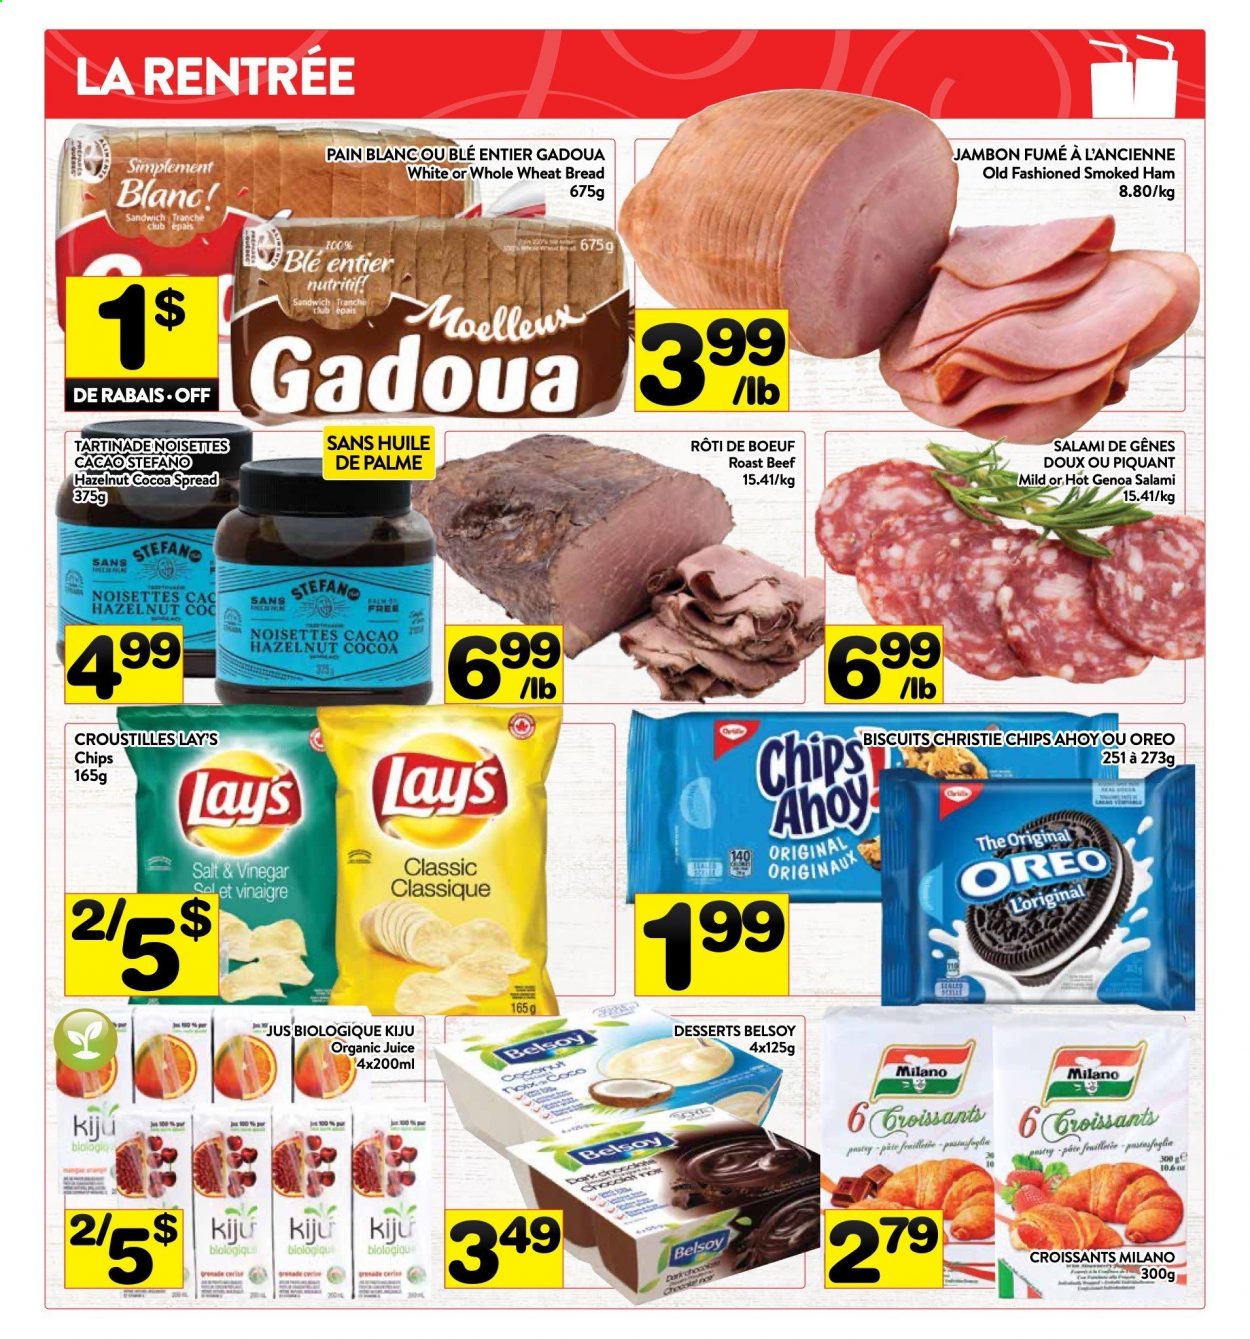 PA Supermarché flyer  - August 23, 2021 - August 29, 2021.